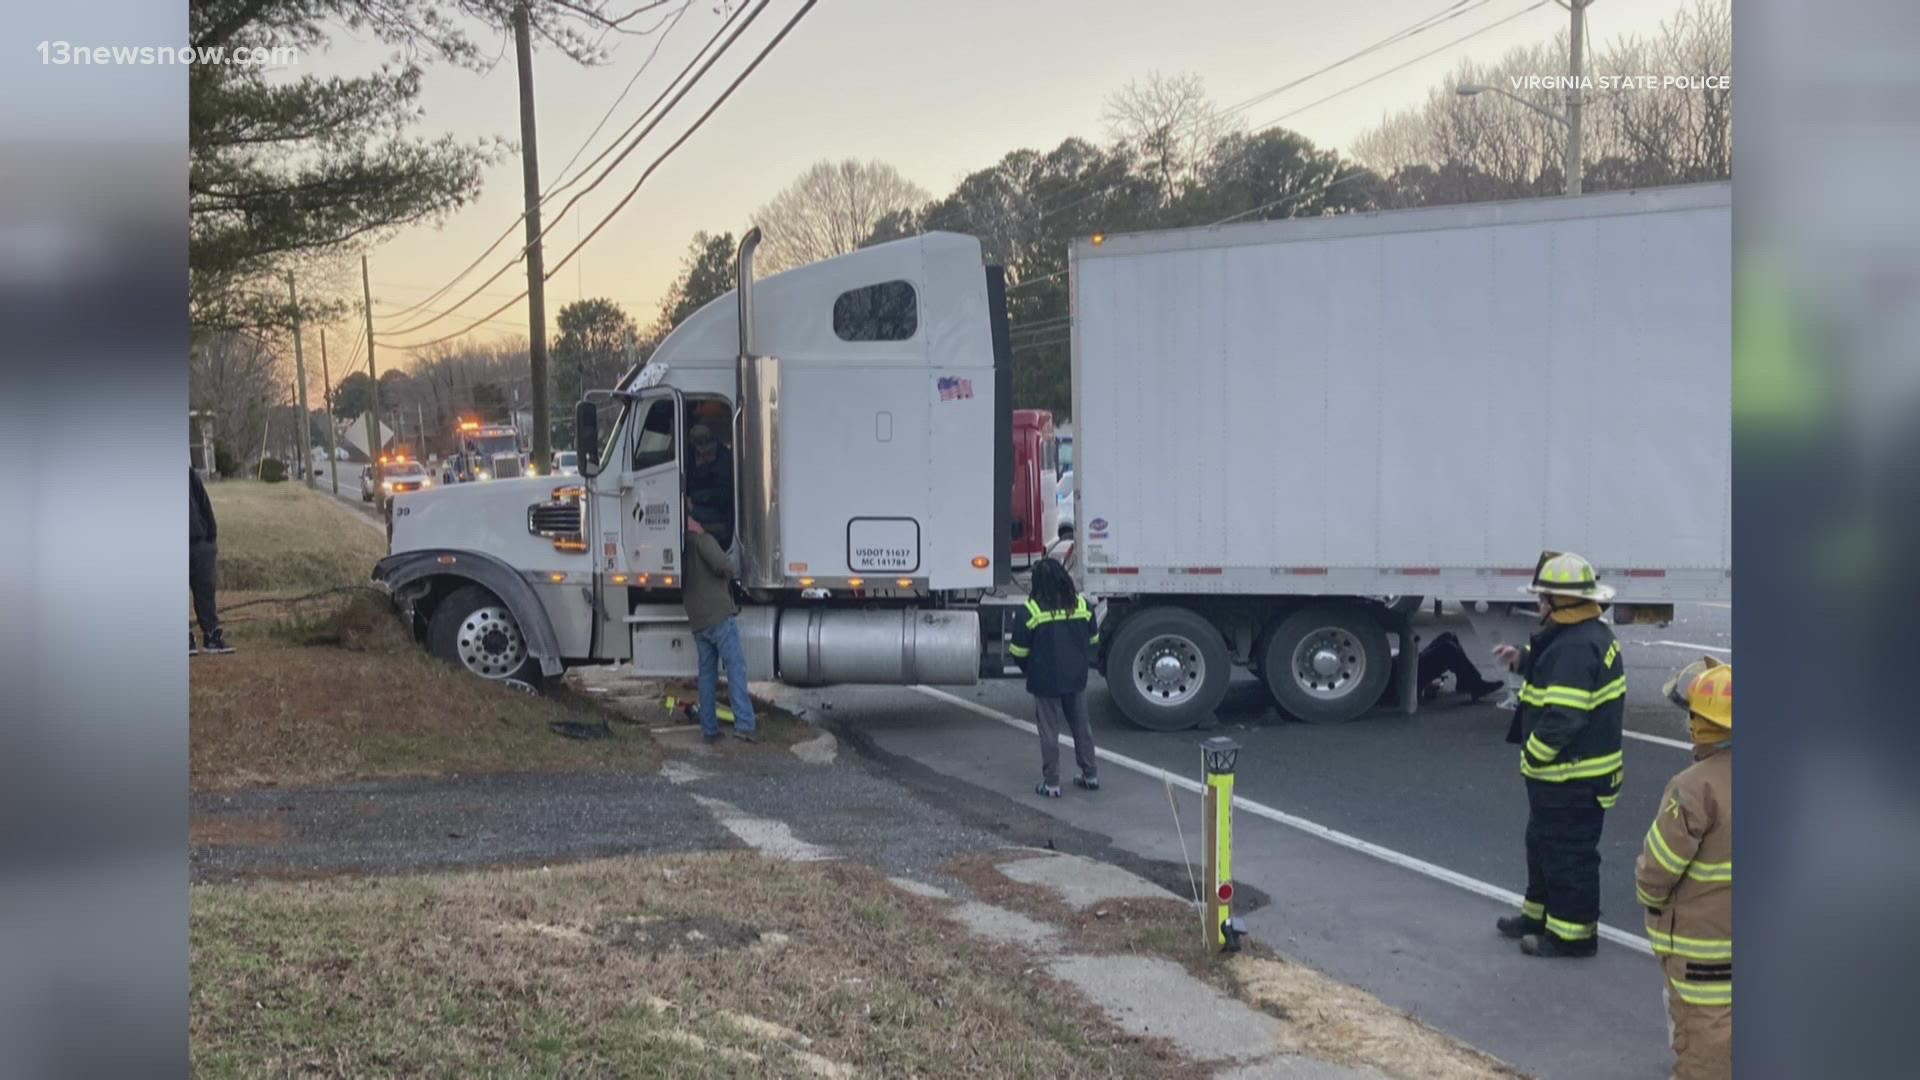 The Virginia State Police (VSP) said troopers were investigating a deadly crash in the Oak Hall area of Accomack County on February 14.